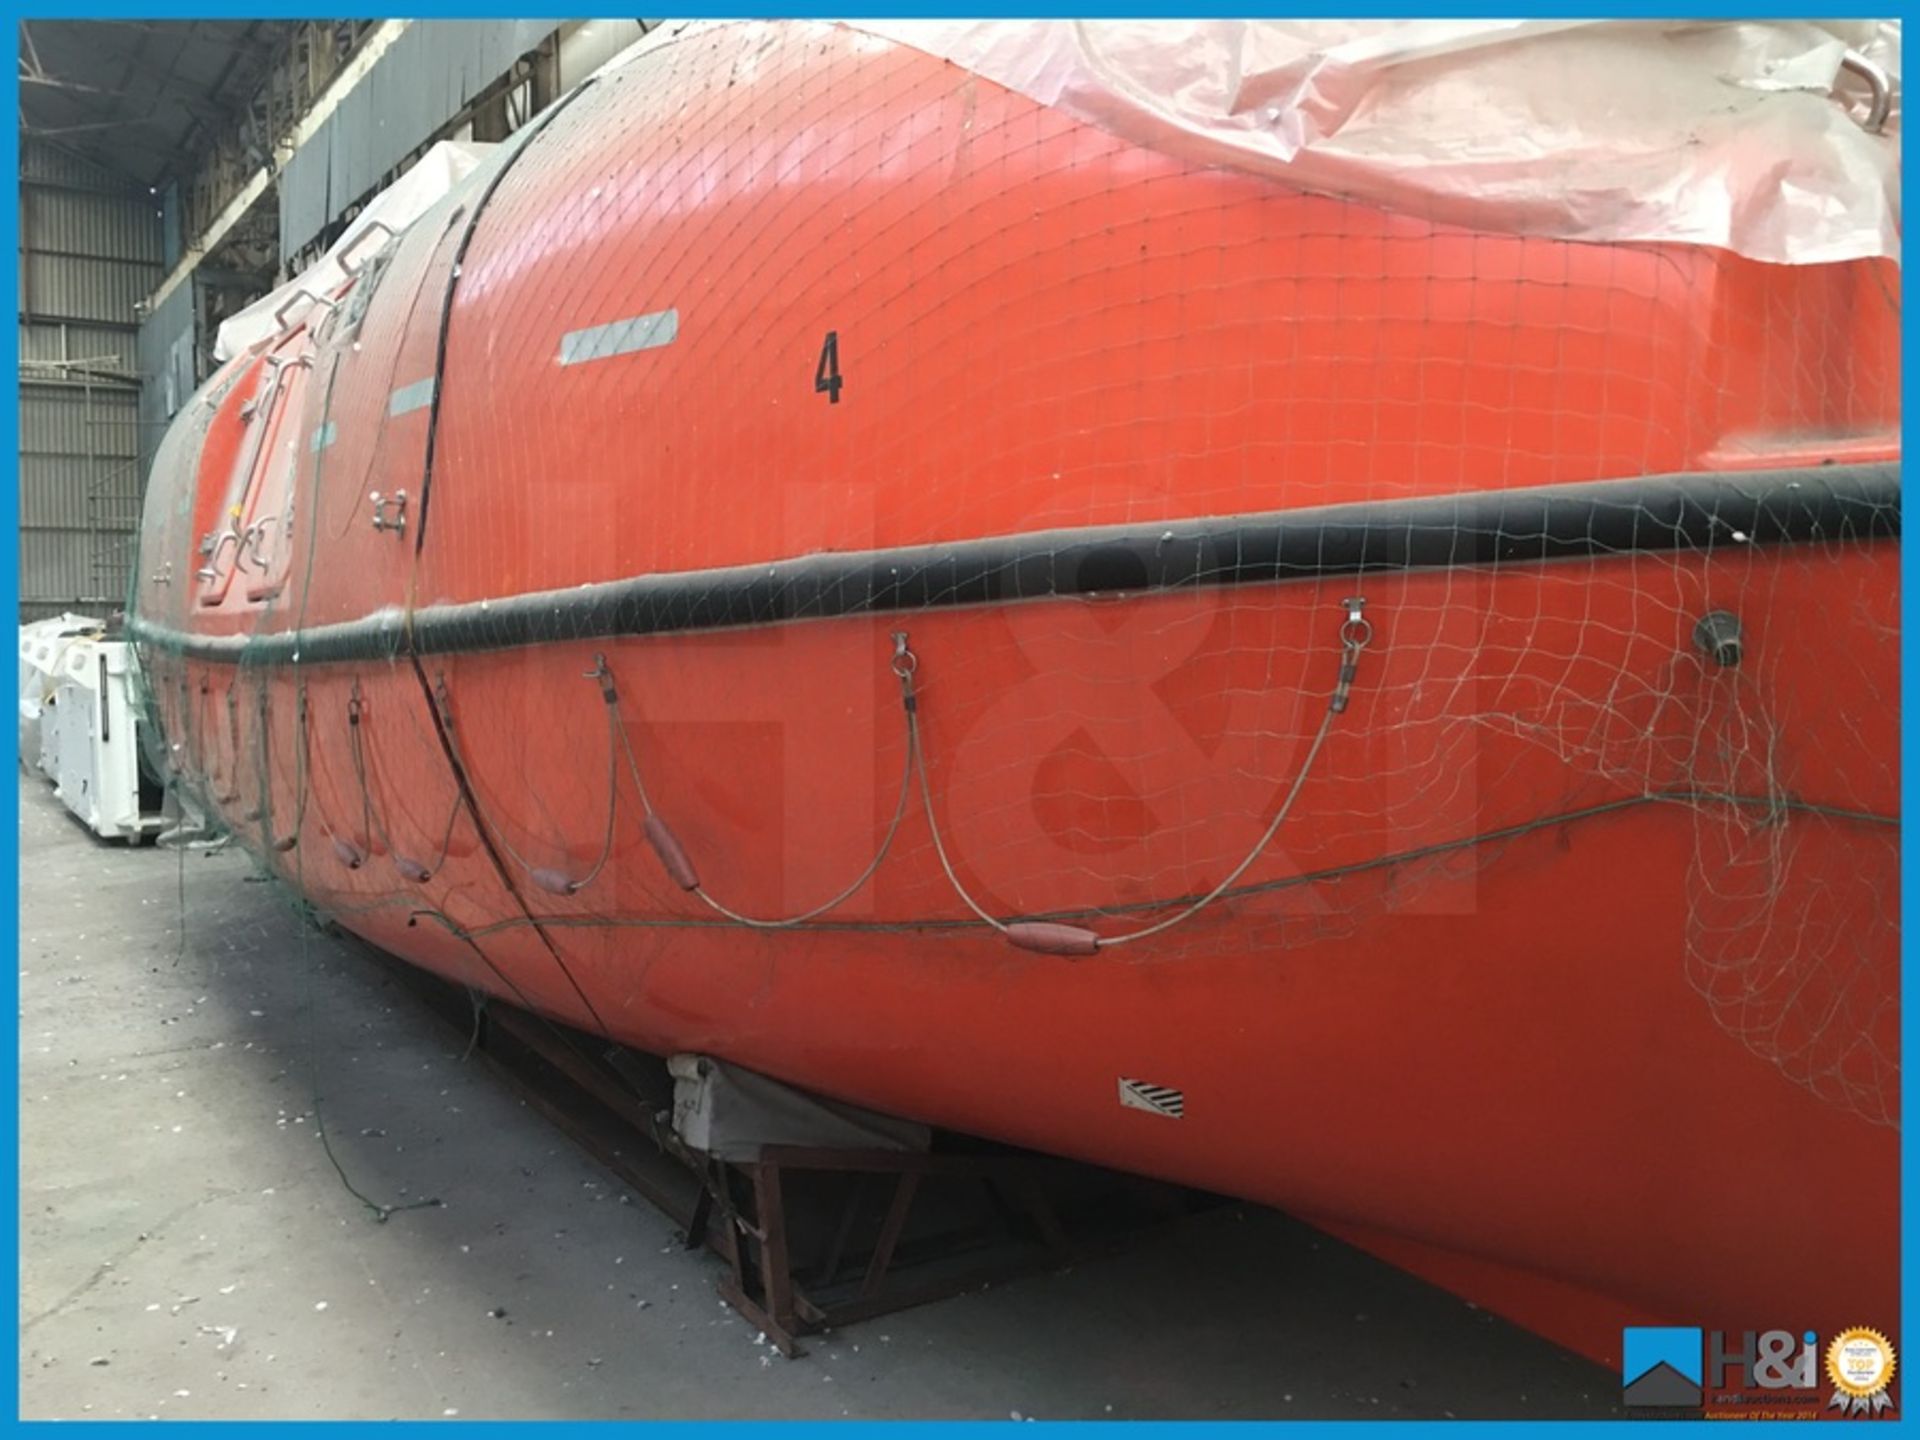 Noreq LBT935T totally enclosed lifeboat built approximately 2010 for same marine project as the - Image 7 of 38